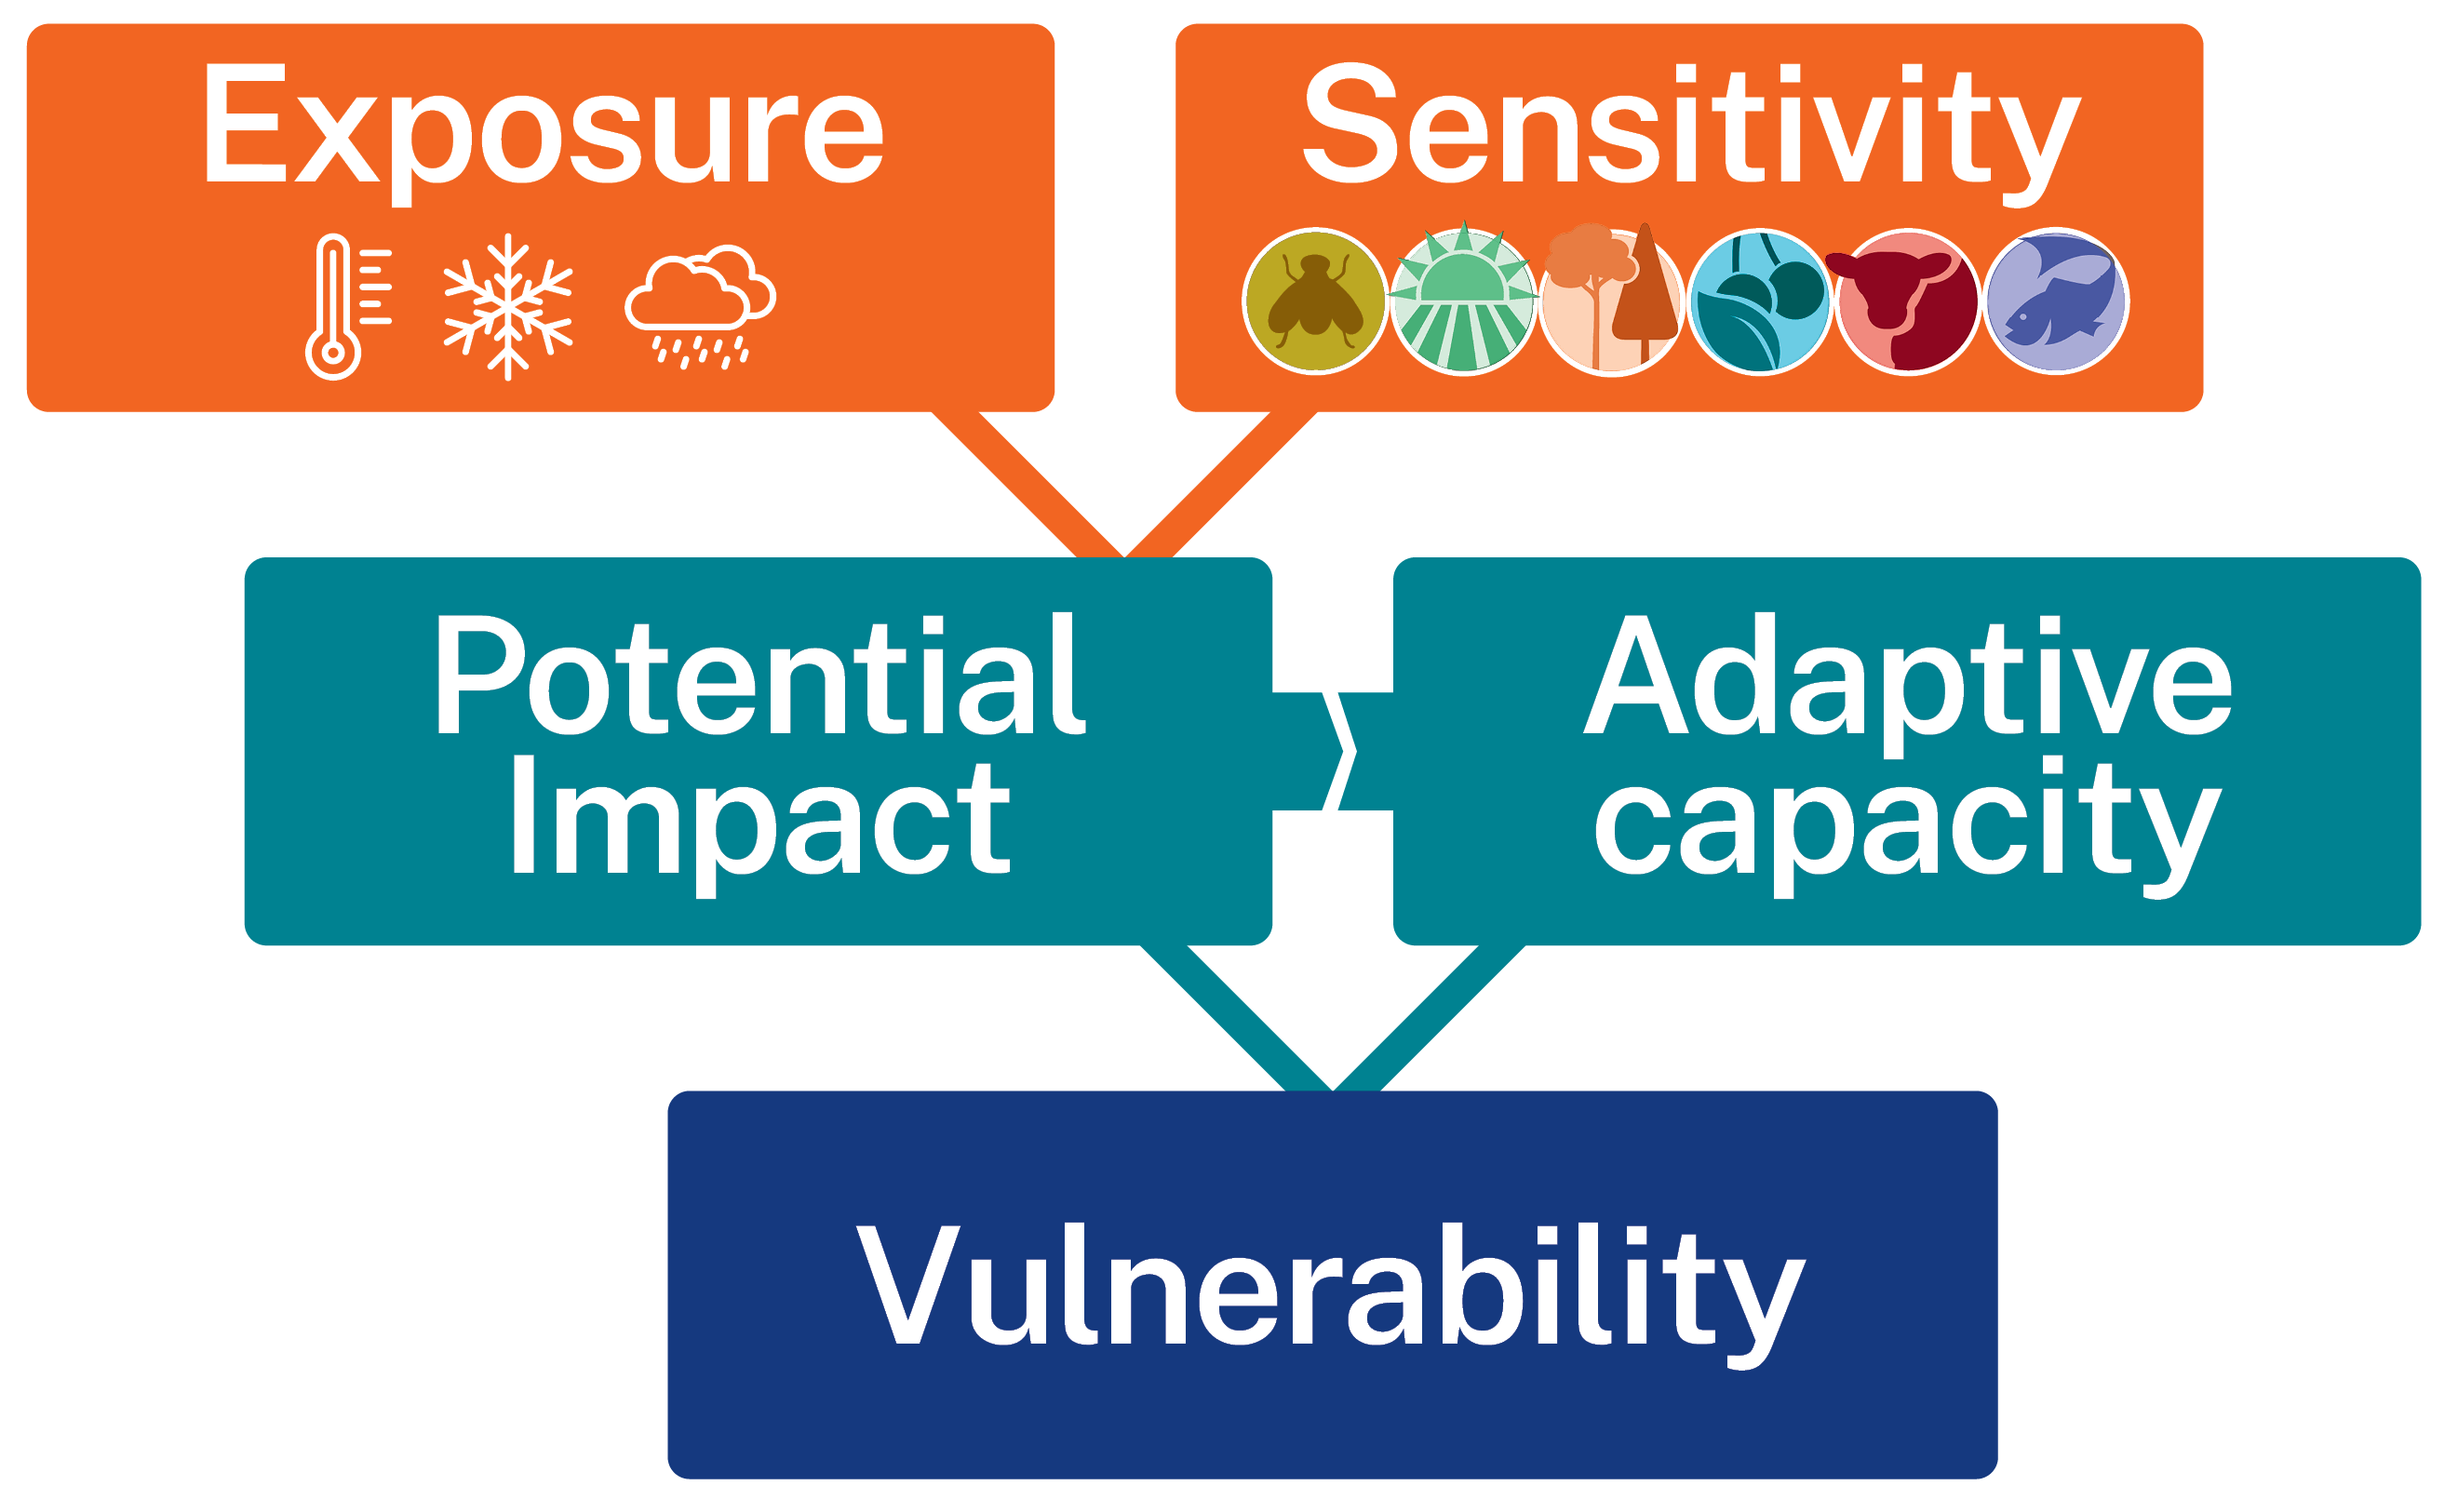 Climate vulnerability can be evaluated by examining the potential impact of climate on an organism, based on exposure and the organism's sensitivity.